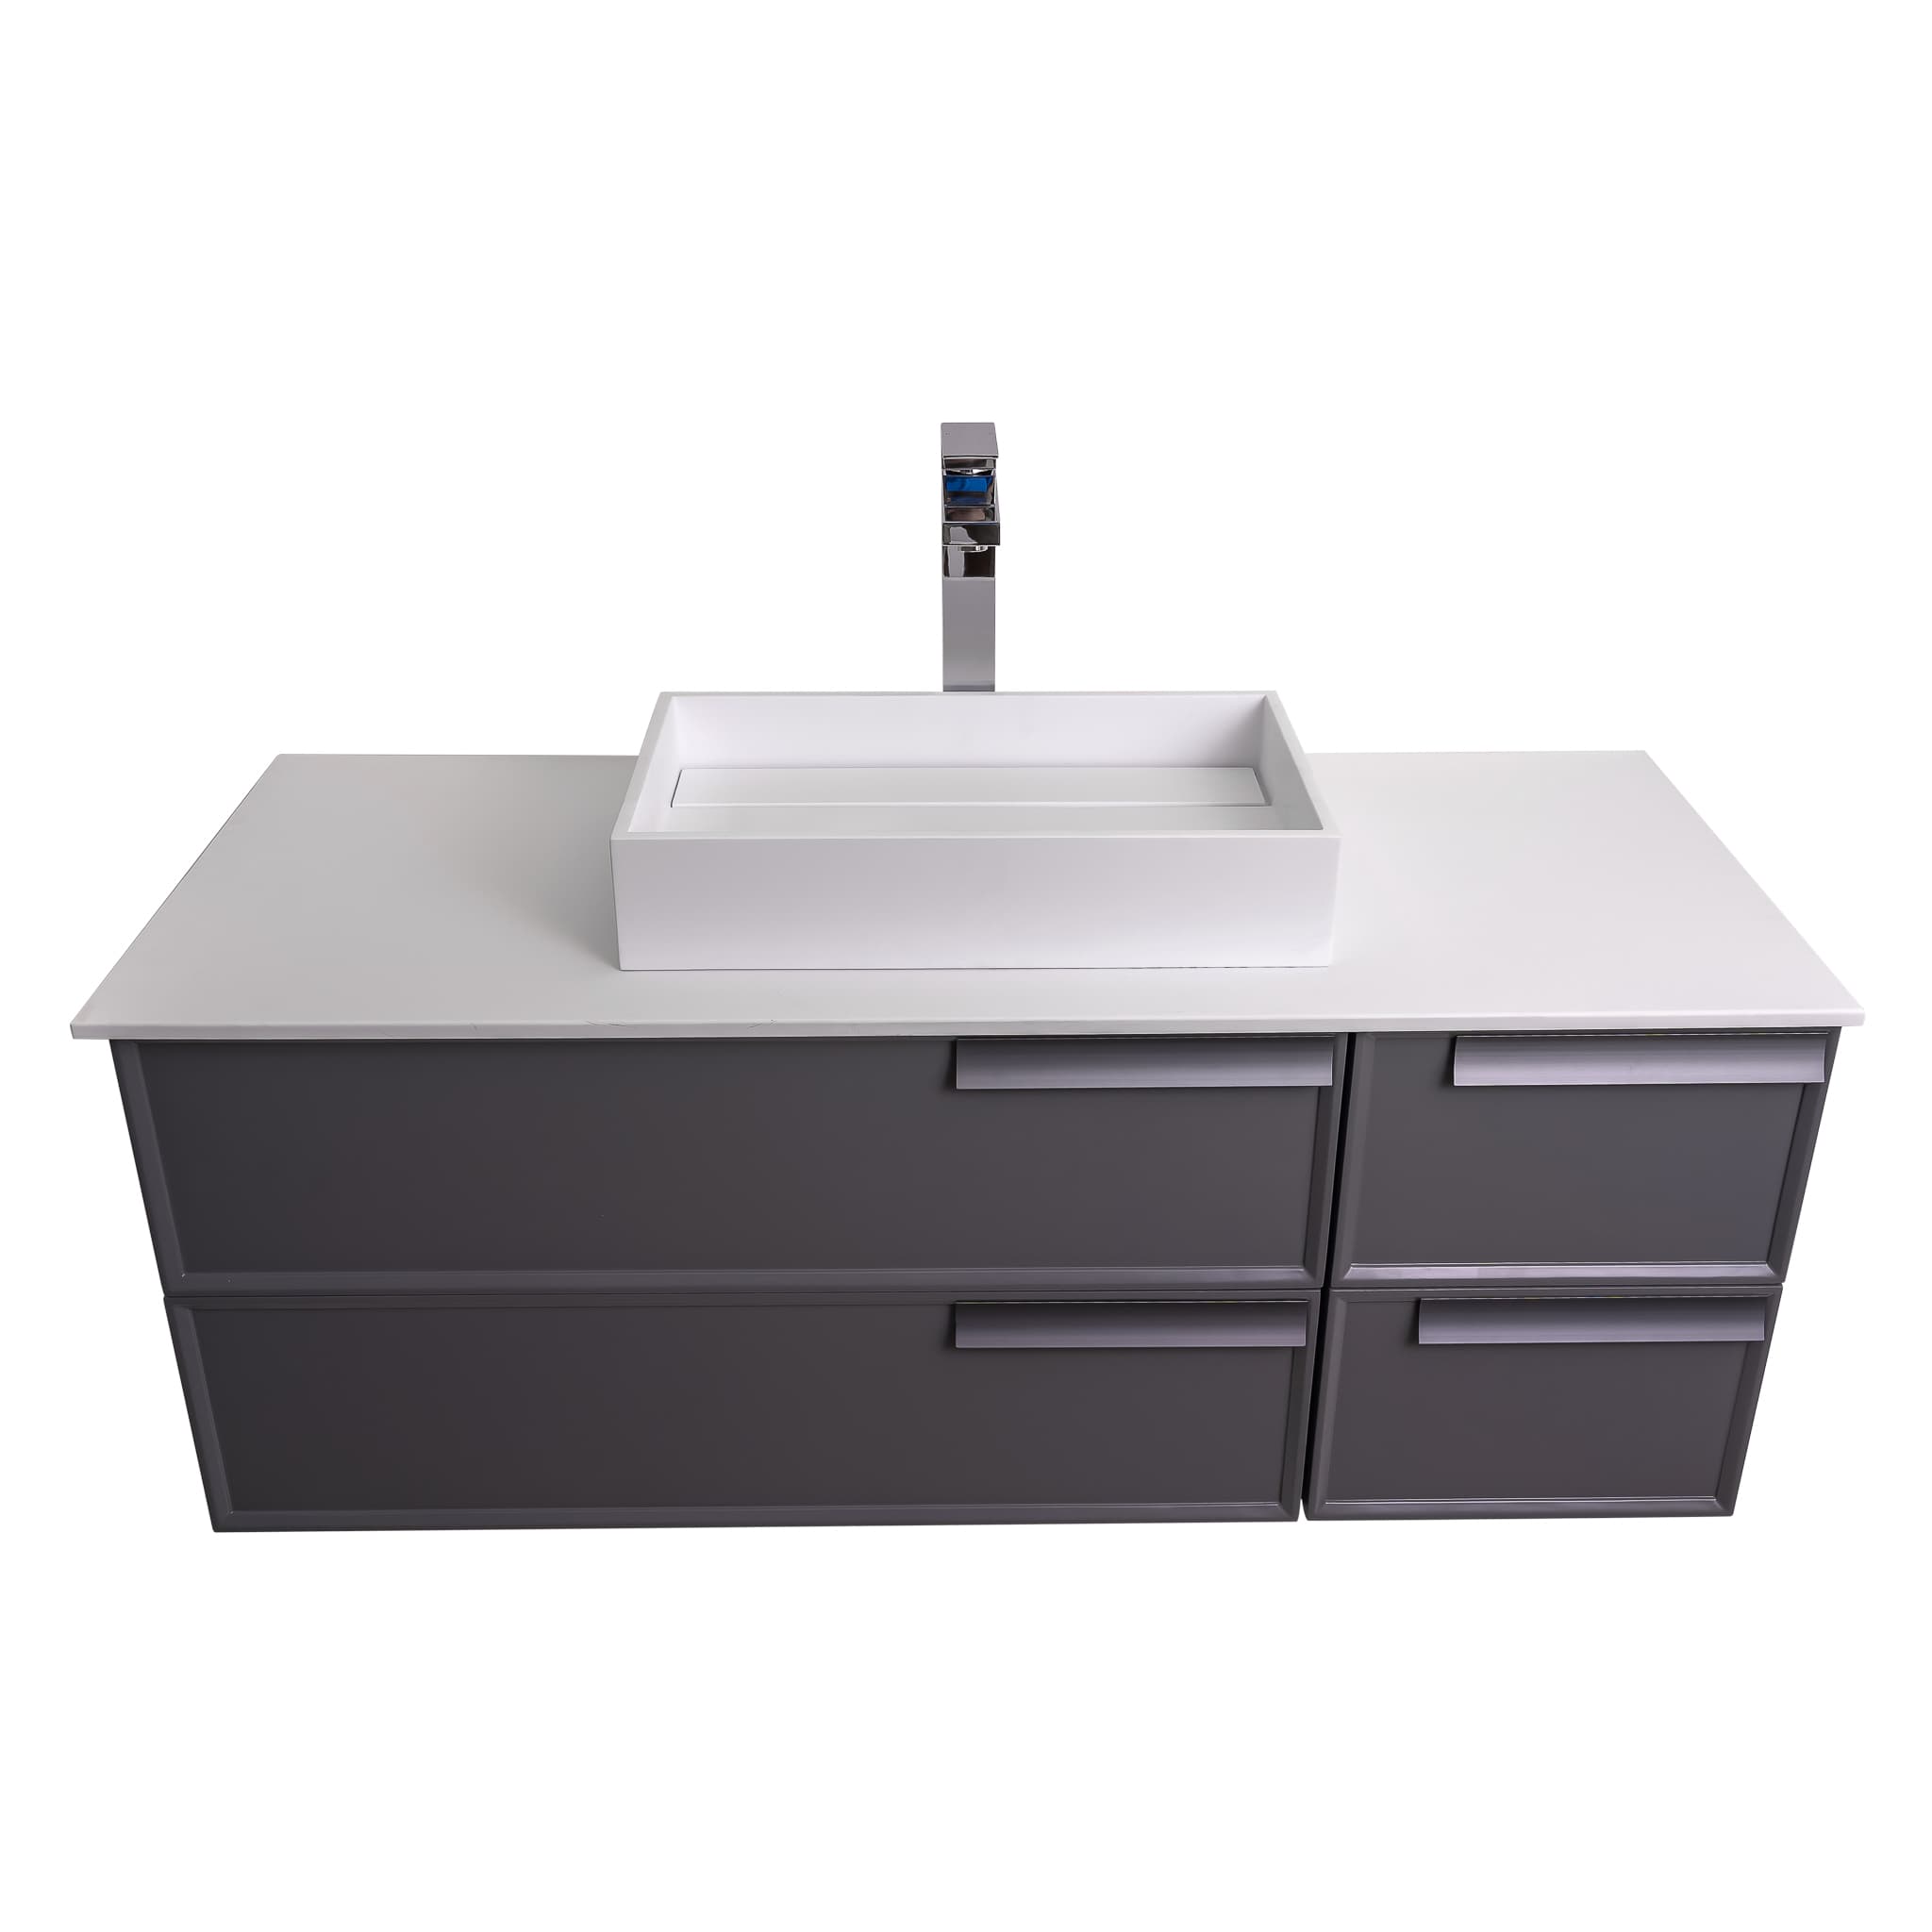 Garda 47.5 Matte Grey Cabinet, Solid Surface Flat White Counter and Infinity Square Solid Surface White Basin 1329, Wall Mounted Modern Vanity Set